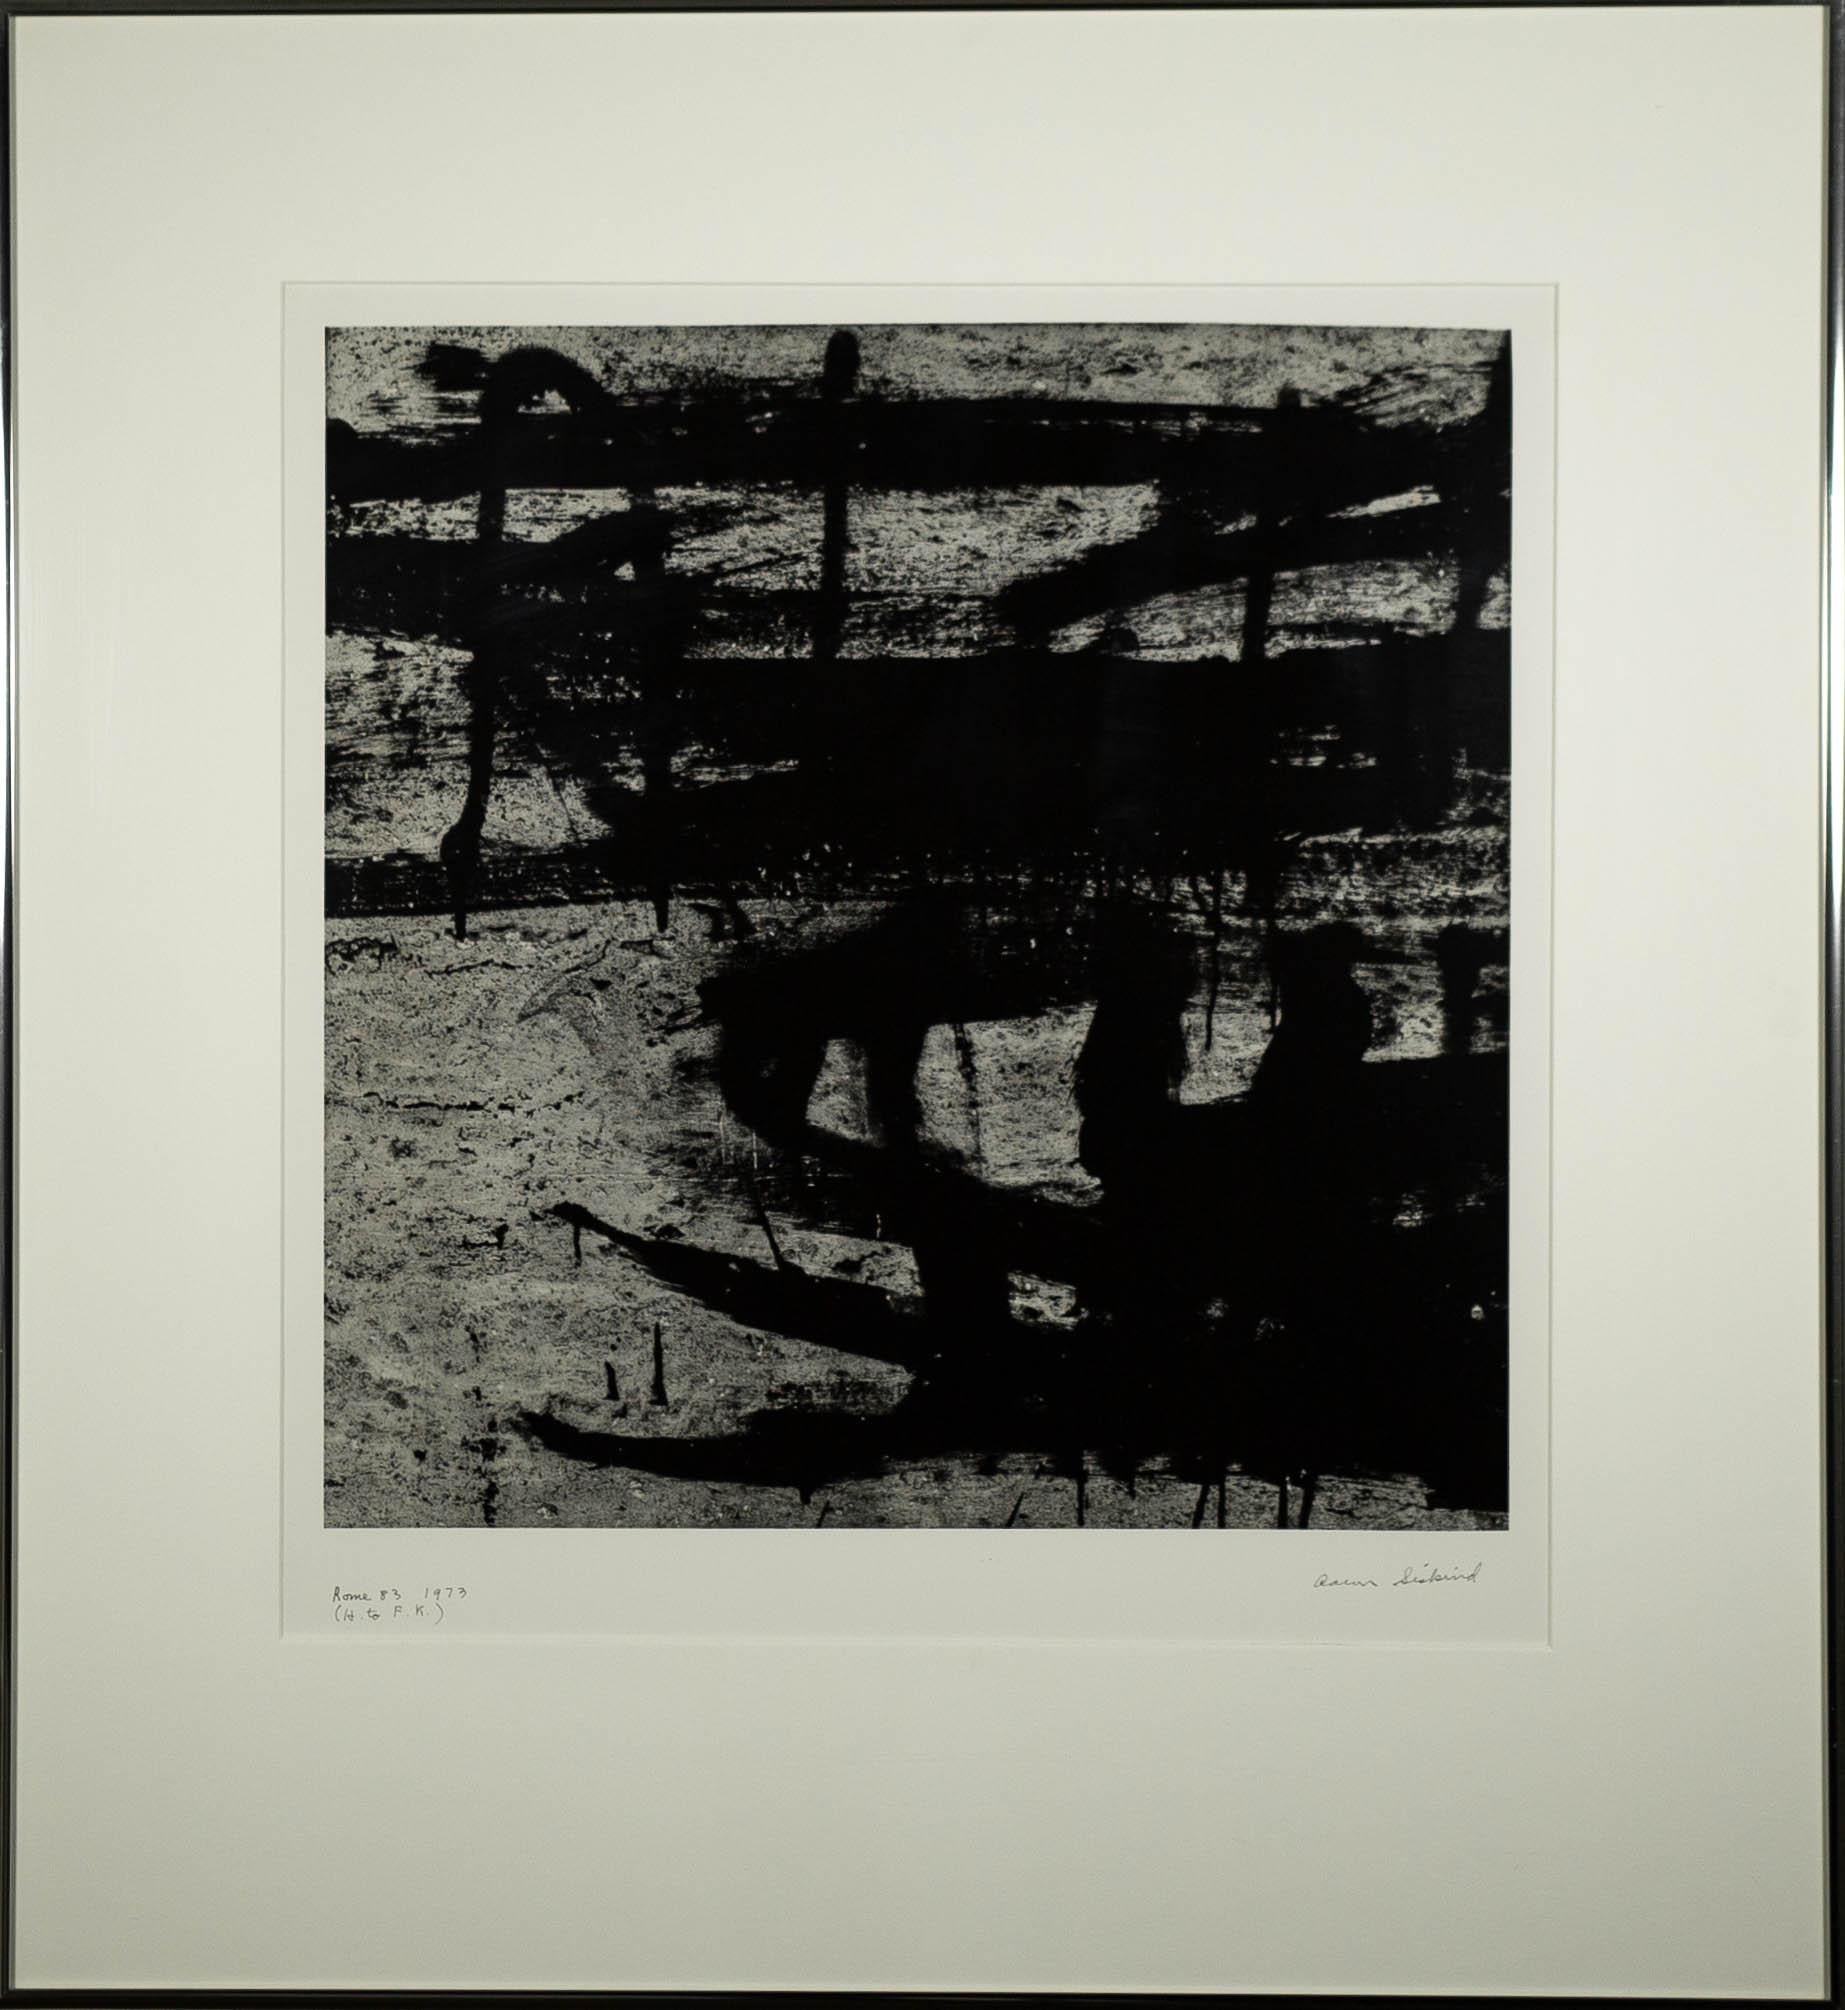 Rome 83 1973 (Homage to Franz Klein) - Print by Aaron Siskind